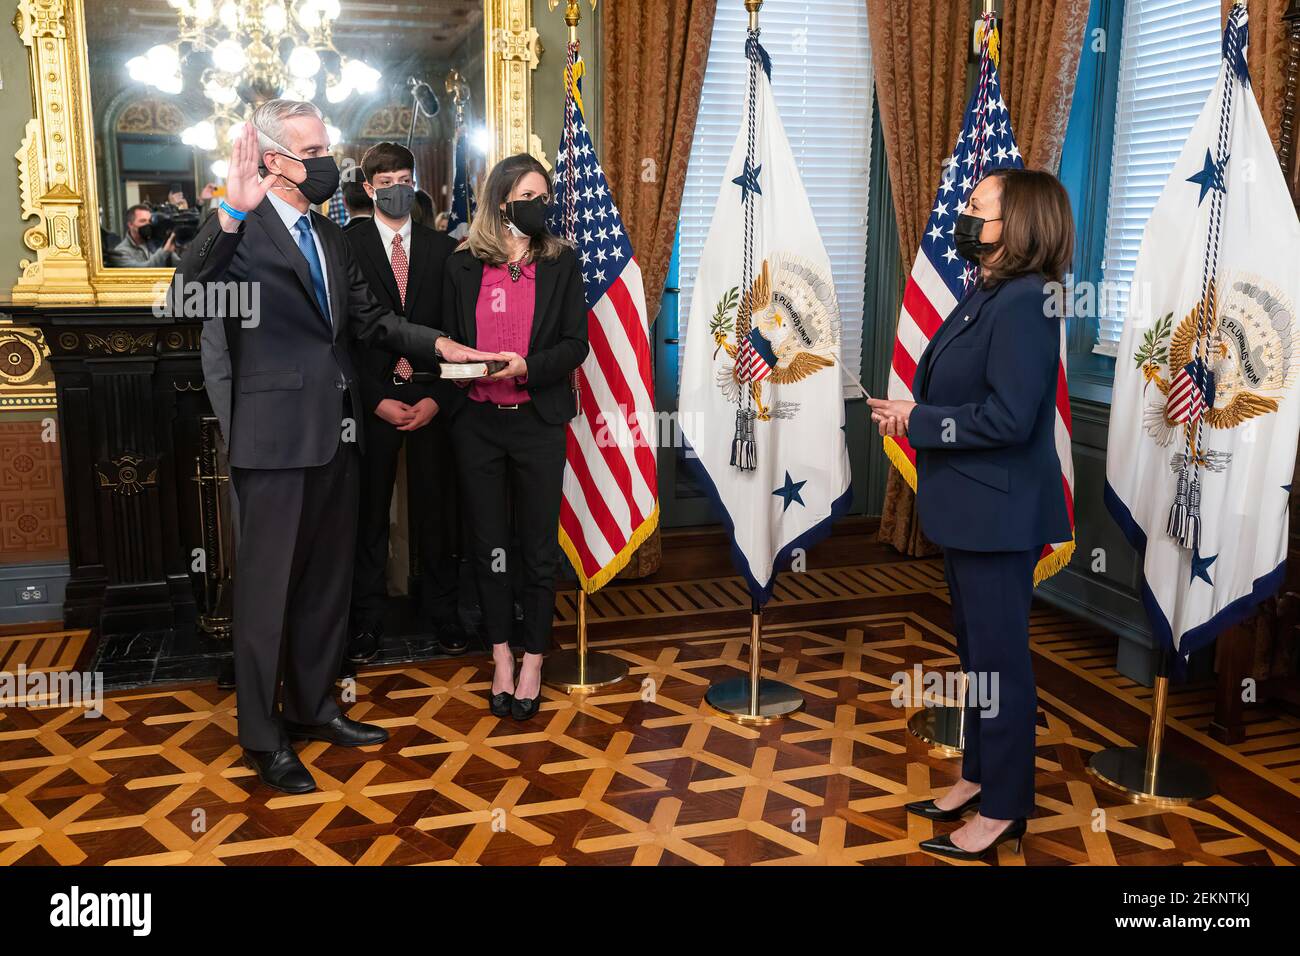 Vice President Kamala Harris swears in Denis McDonough as Secretary of Veterans Affairs Tuesday, Feb. 9, 2021, in the Vice President’s Ceremonial Office in the Eisenhower Executive Office Building of the White House. Secretary McDonough’s family attends. (Official White House Photo by Lawrence Jackson) Stock Photo